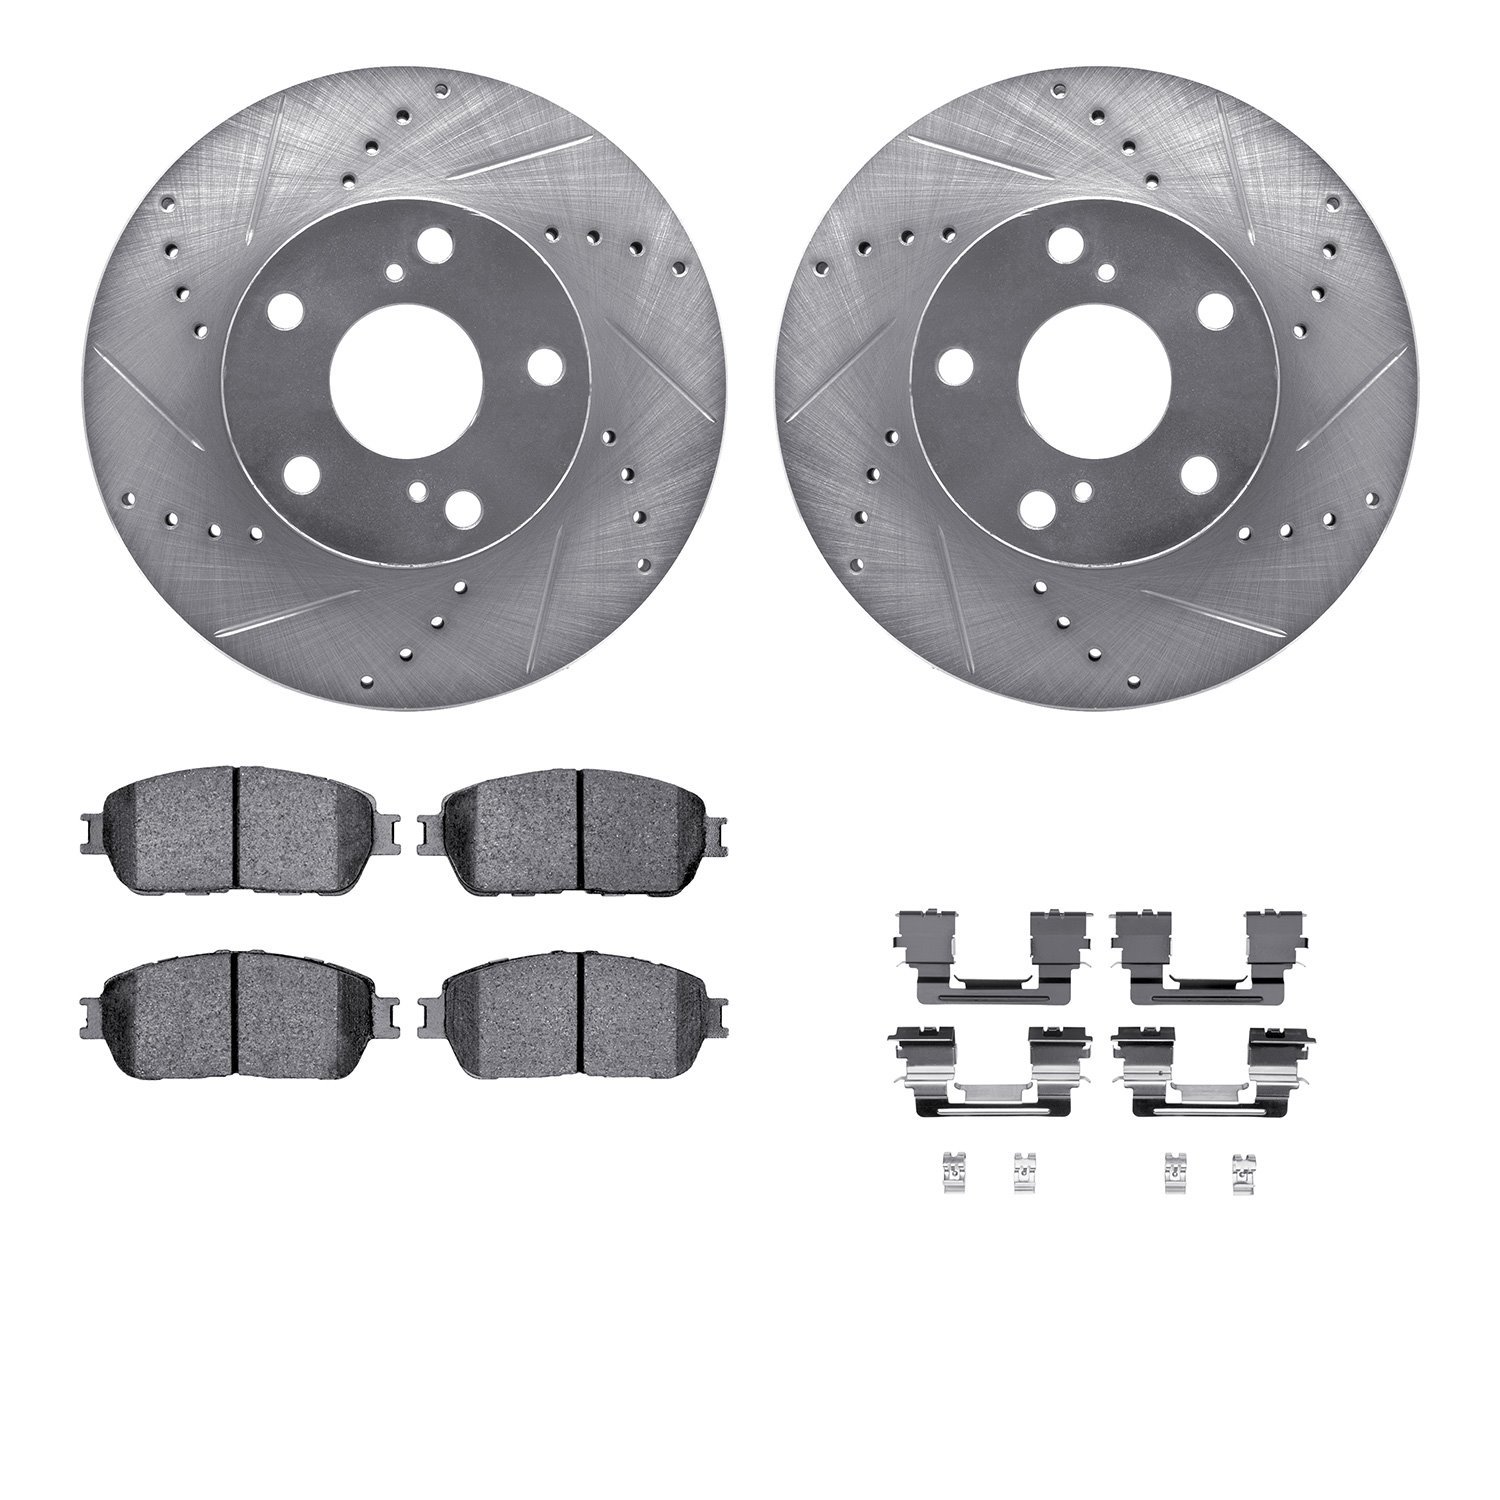 7412-76018 Drilled/Slotted Brake Rotors with Ultimate-Duty Brake Pads Kit & Hardware [Silver], 2005-2015 Lexus/Toyota/Scion, Pos